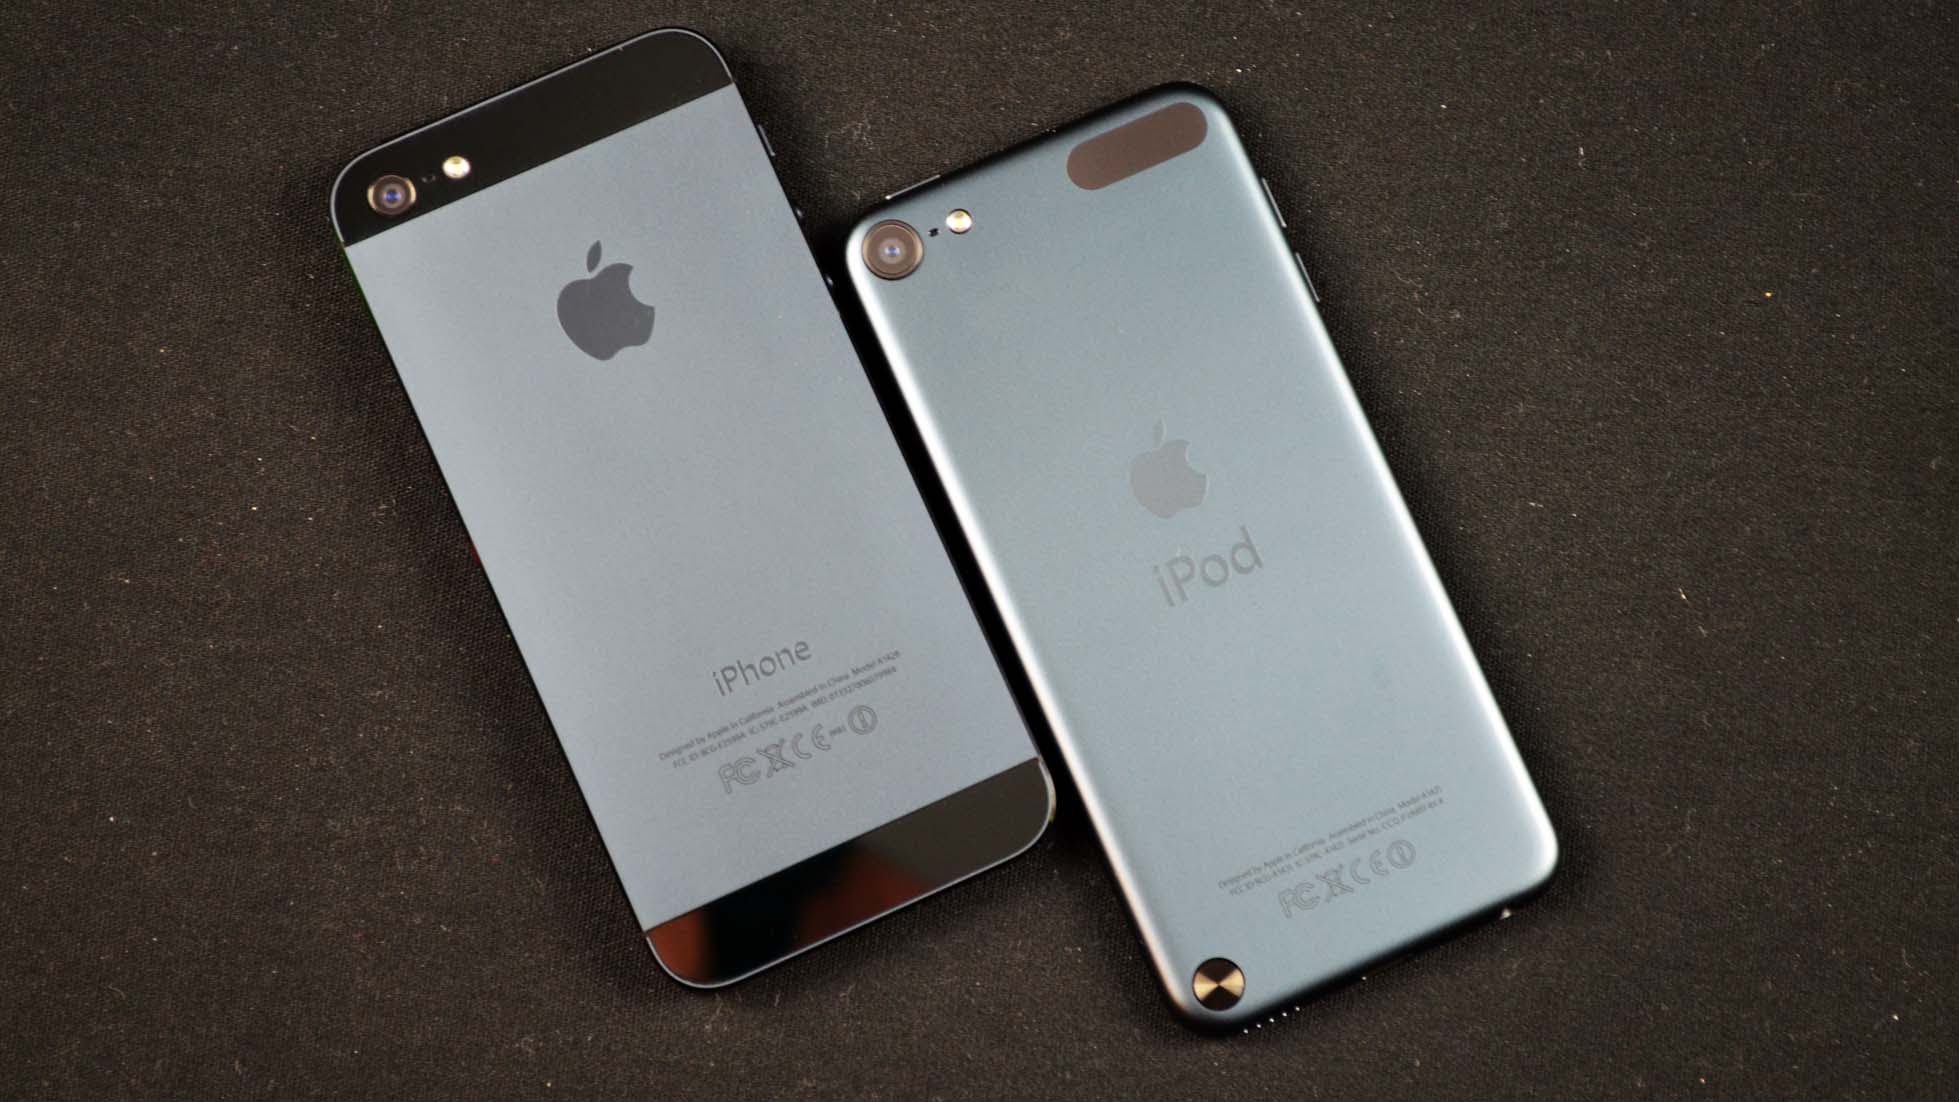 Iphone 5 год. IPOD Touch 5g. IPOD Touch 5. Iphone 5g. IPOD Touch 5 vs 6.